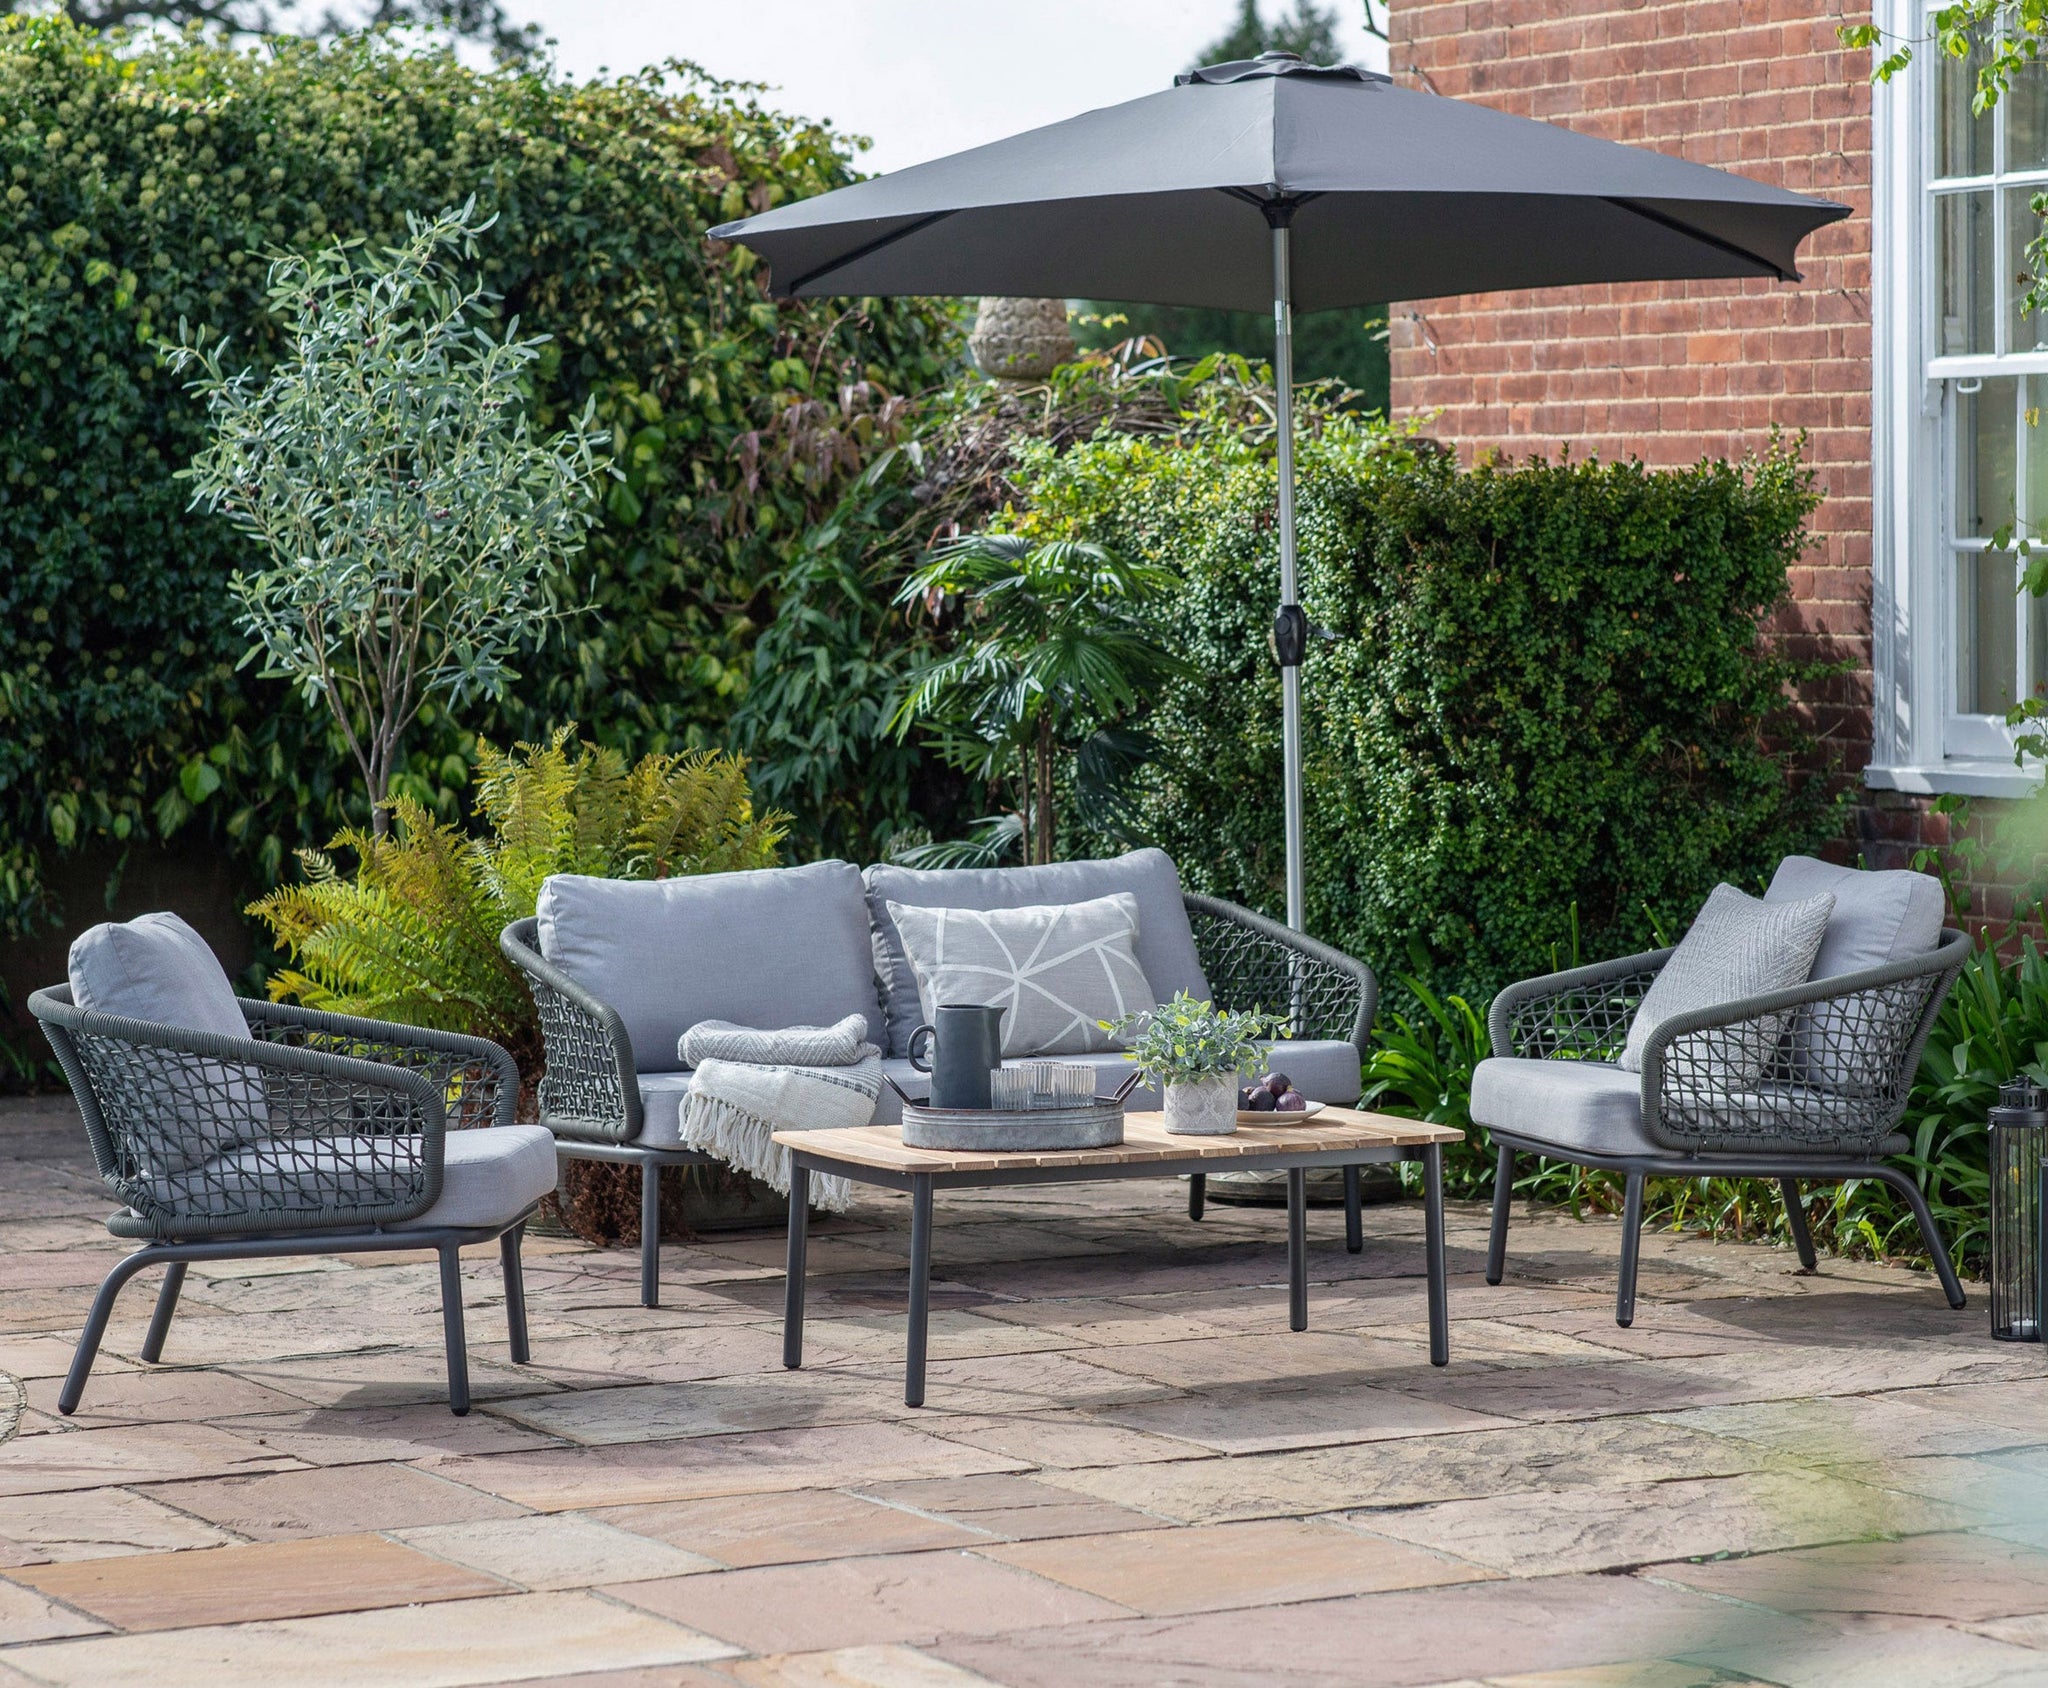 Just arrived: 8 inspiring new homeware & outdoor furniture styles